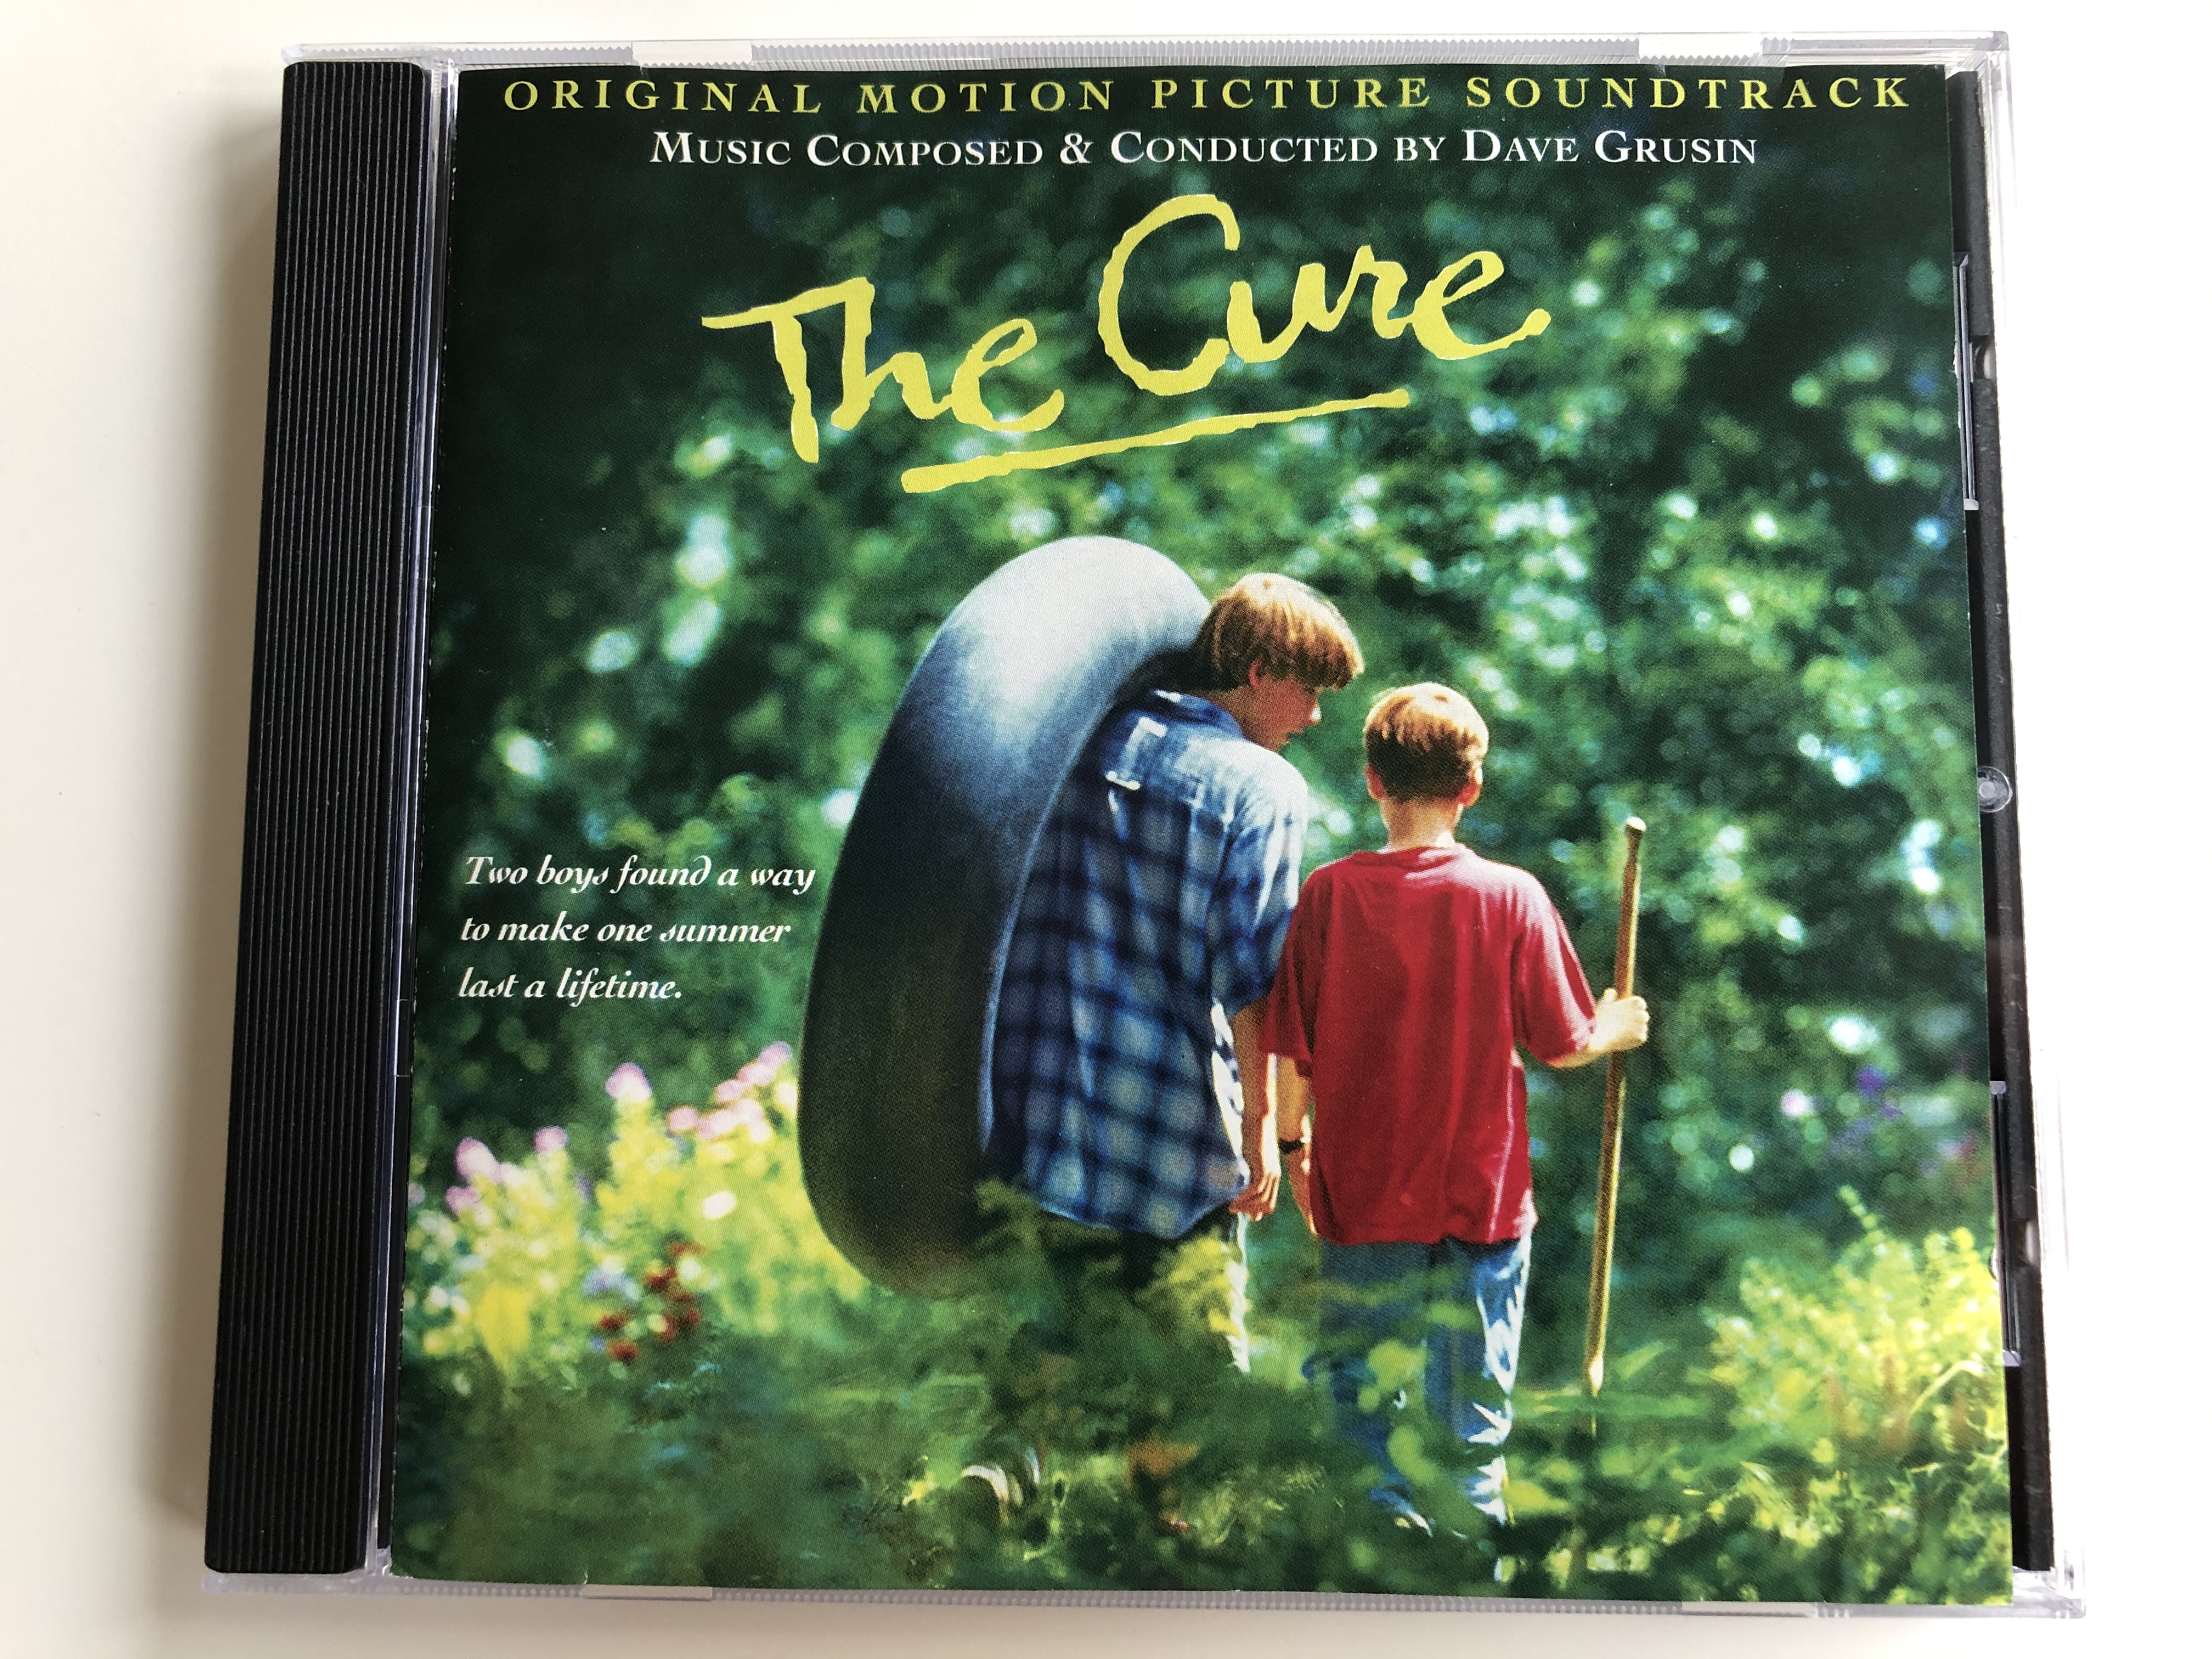 the-cure-original-motion-picture-soundtrack-music-composed-conducted-by-dave-grusin-two-boys-found-way-to-make-one-summer-lost-a-lifetime-grp-audio-cd-1995-grp-98282-1-.jpg